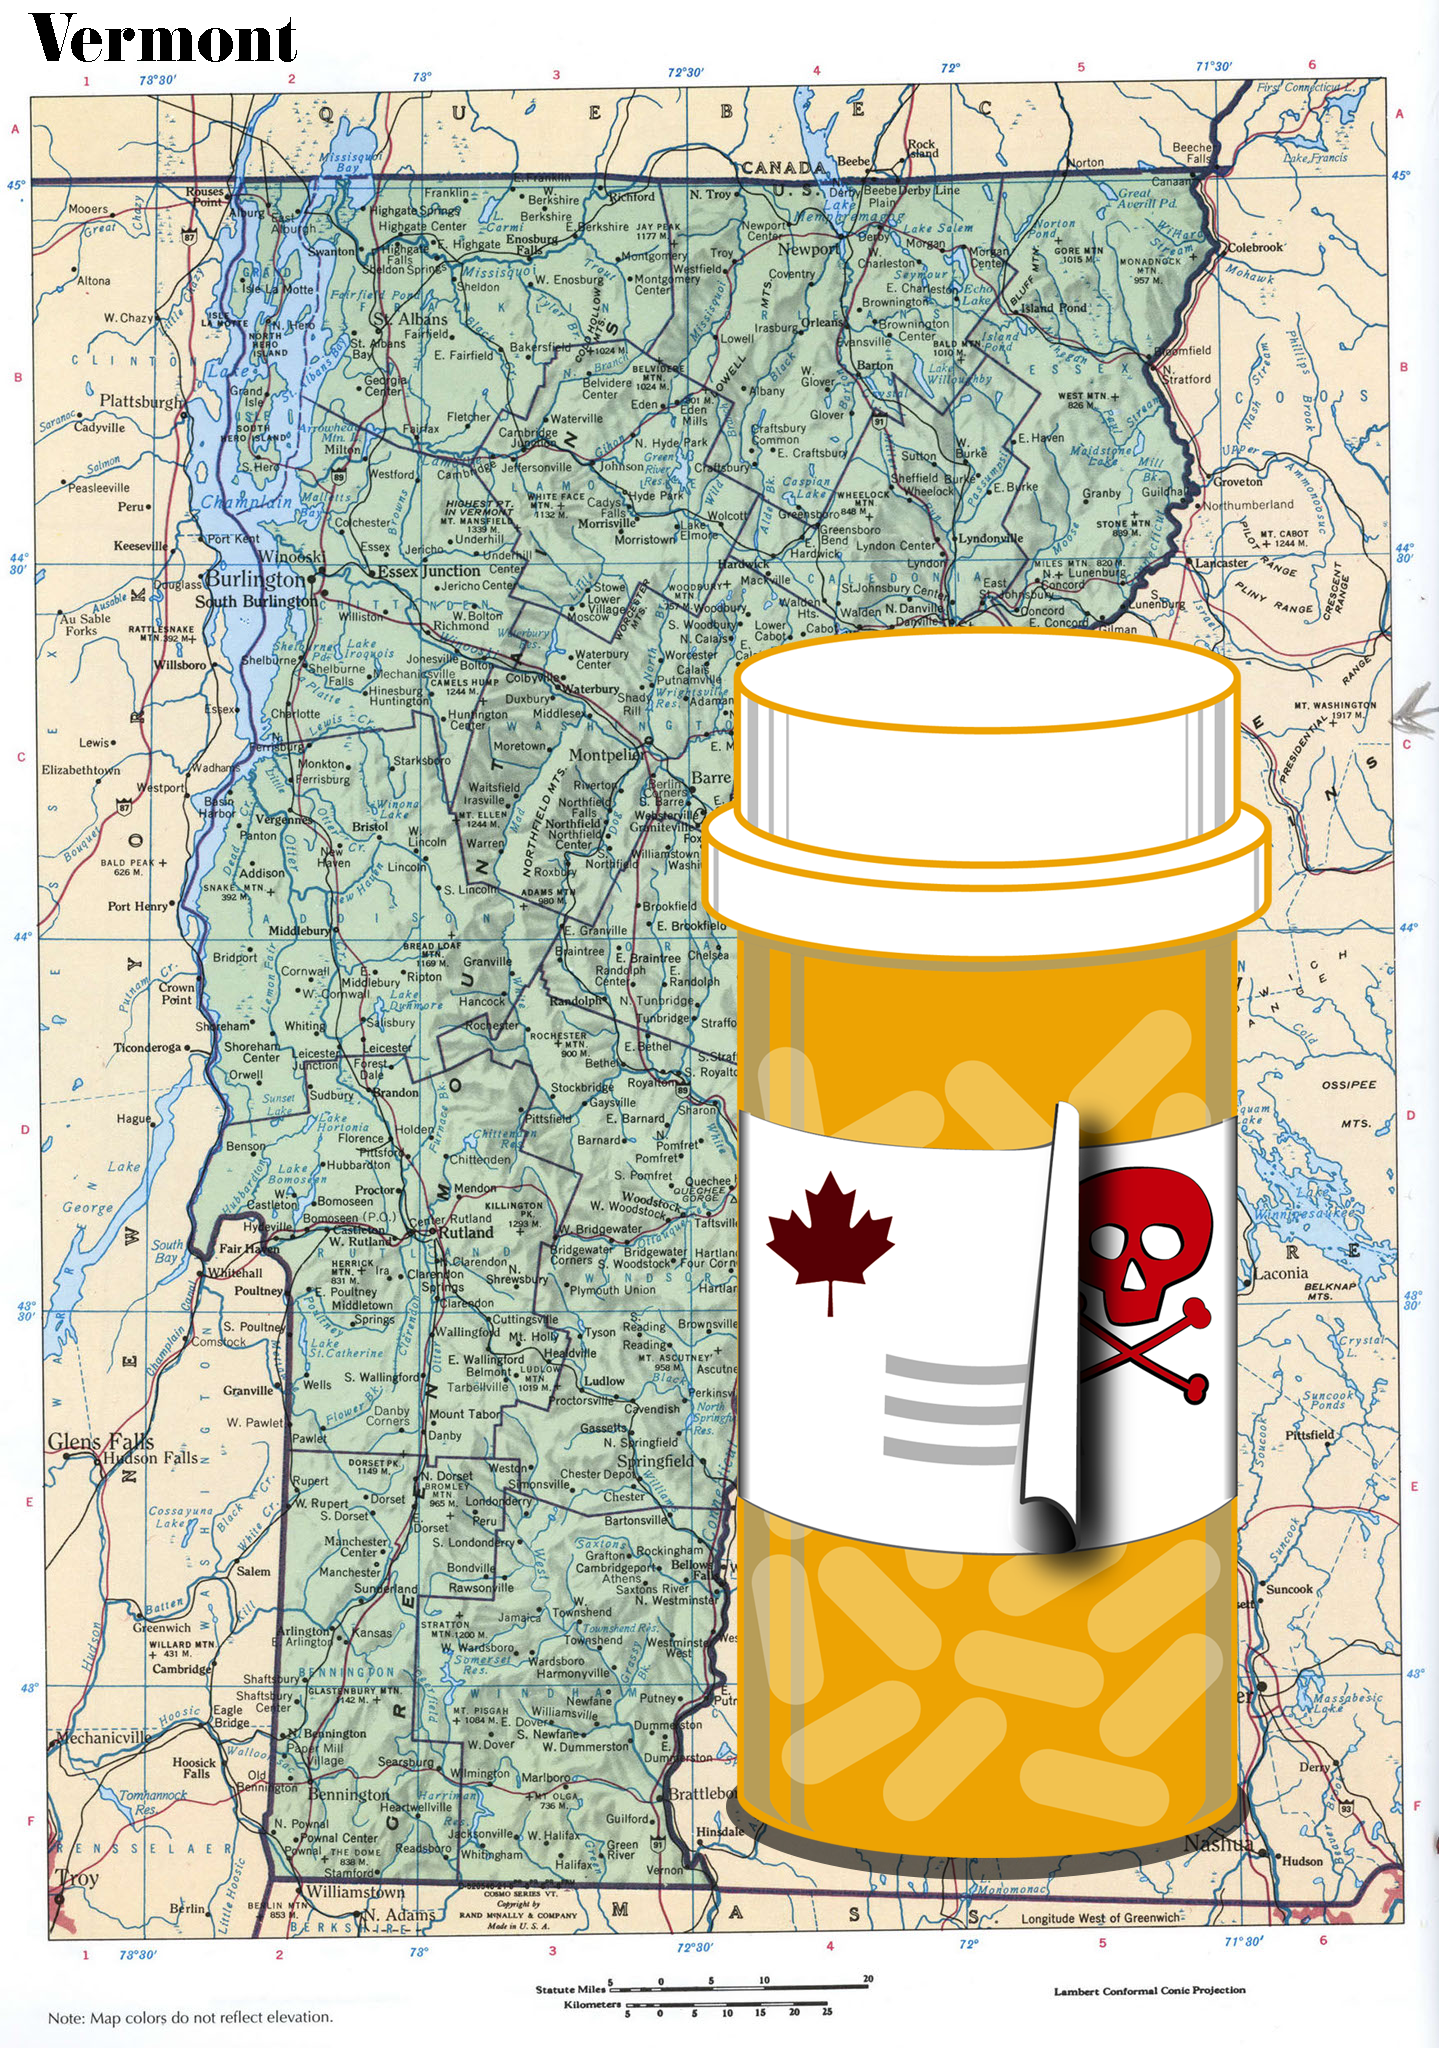 Map of Vermont with a pill bottle displaying a maple leaf. As it peels away, the label shows a poison symbol